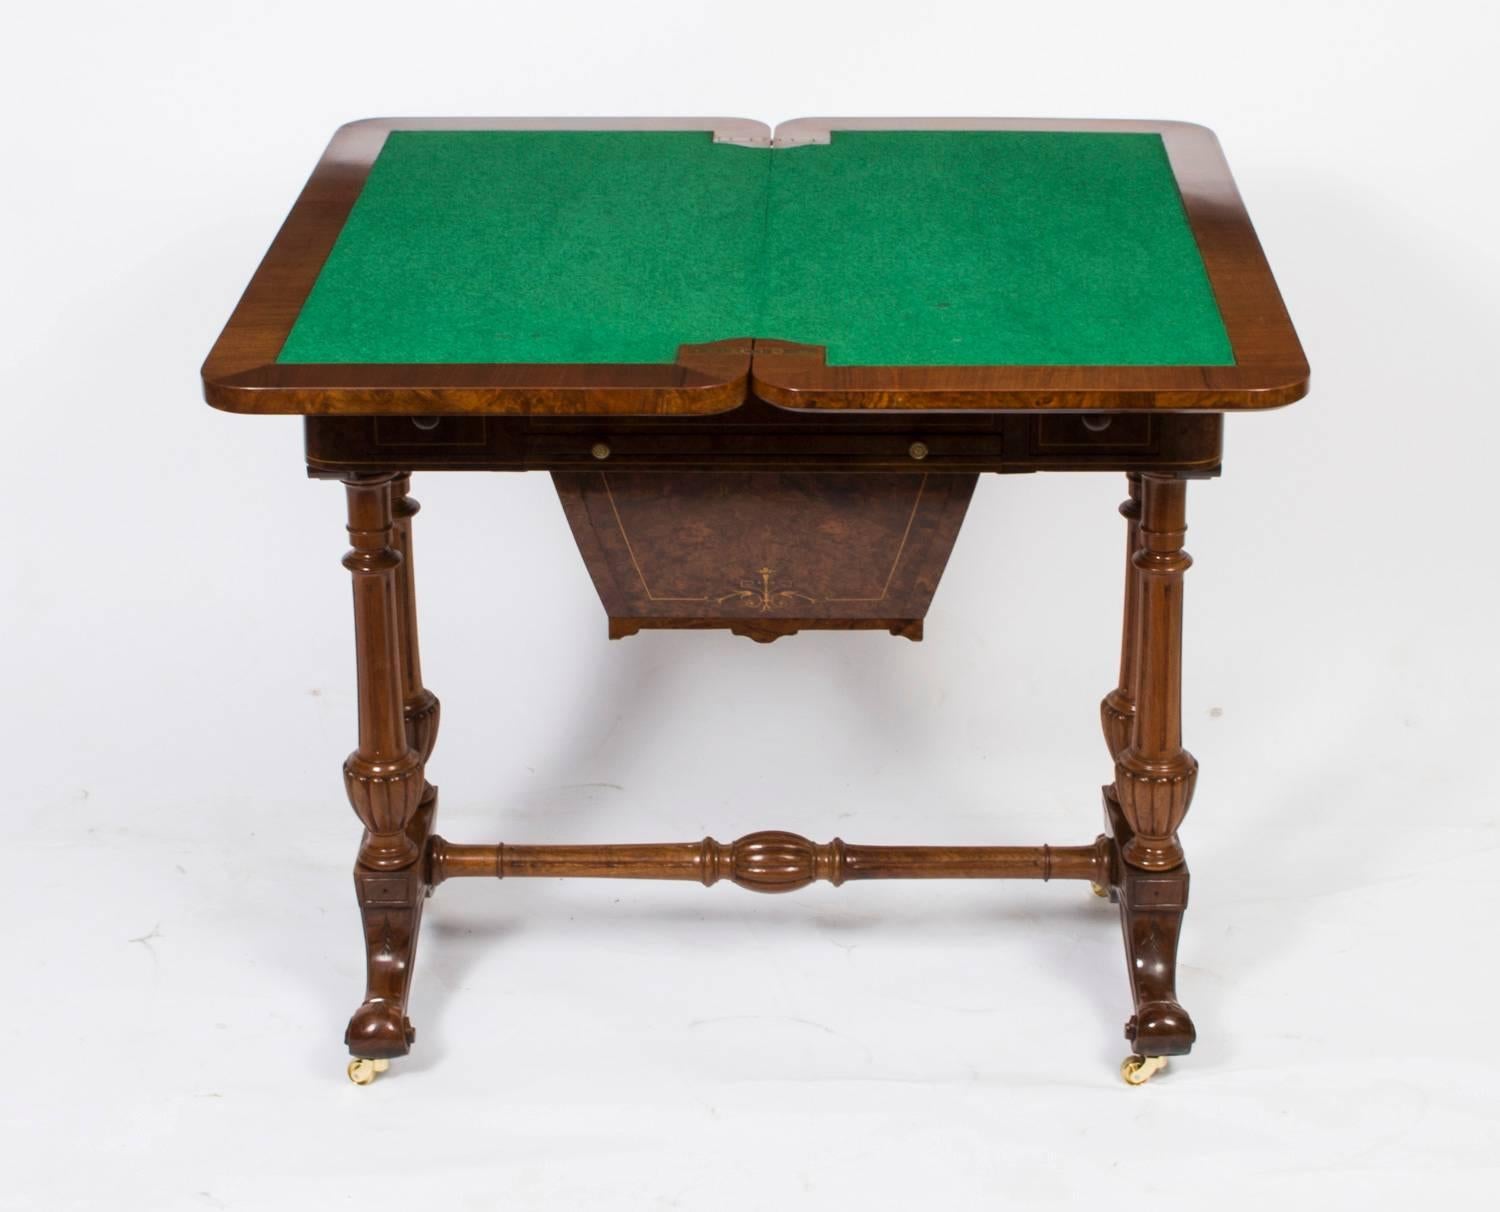 This is a fabulous antique Victorian burr walnut games and work table, circa 1870 in date.

It is made of beautiful burr walnut that has elegant satinwood line inlaid marquetry decoration.

The hinged top opens to reveal a fabulous green baized